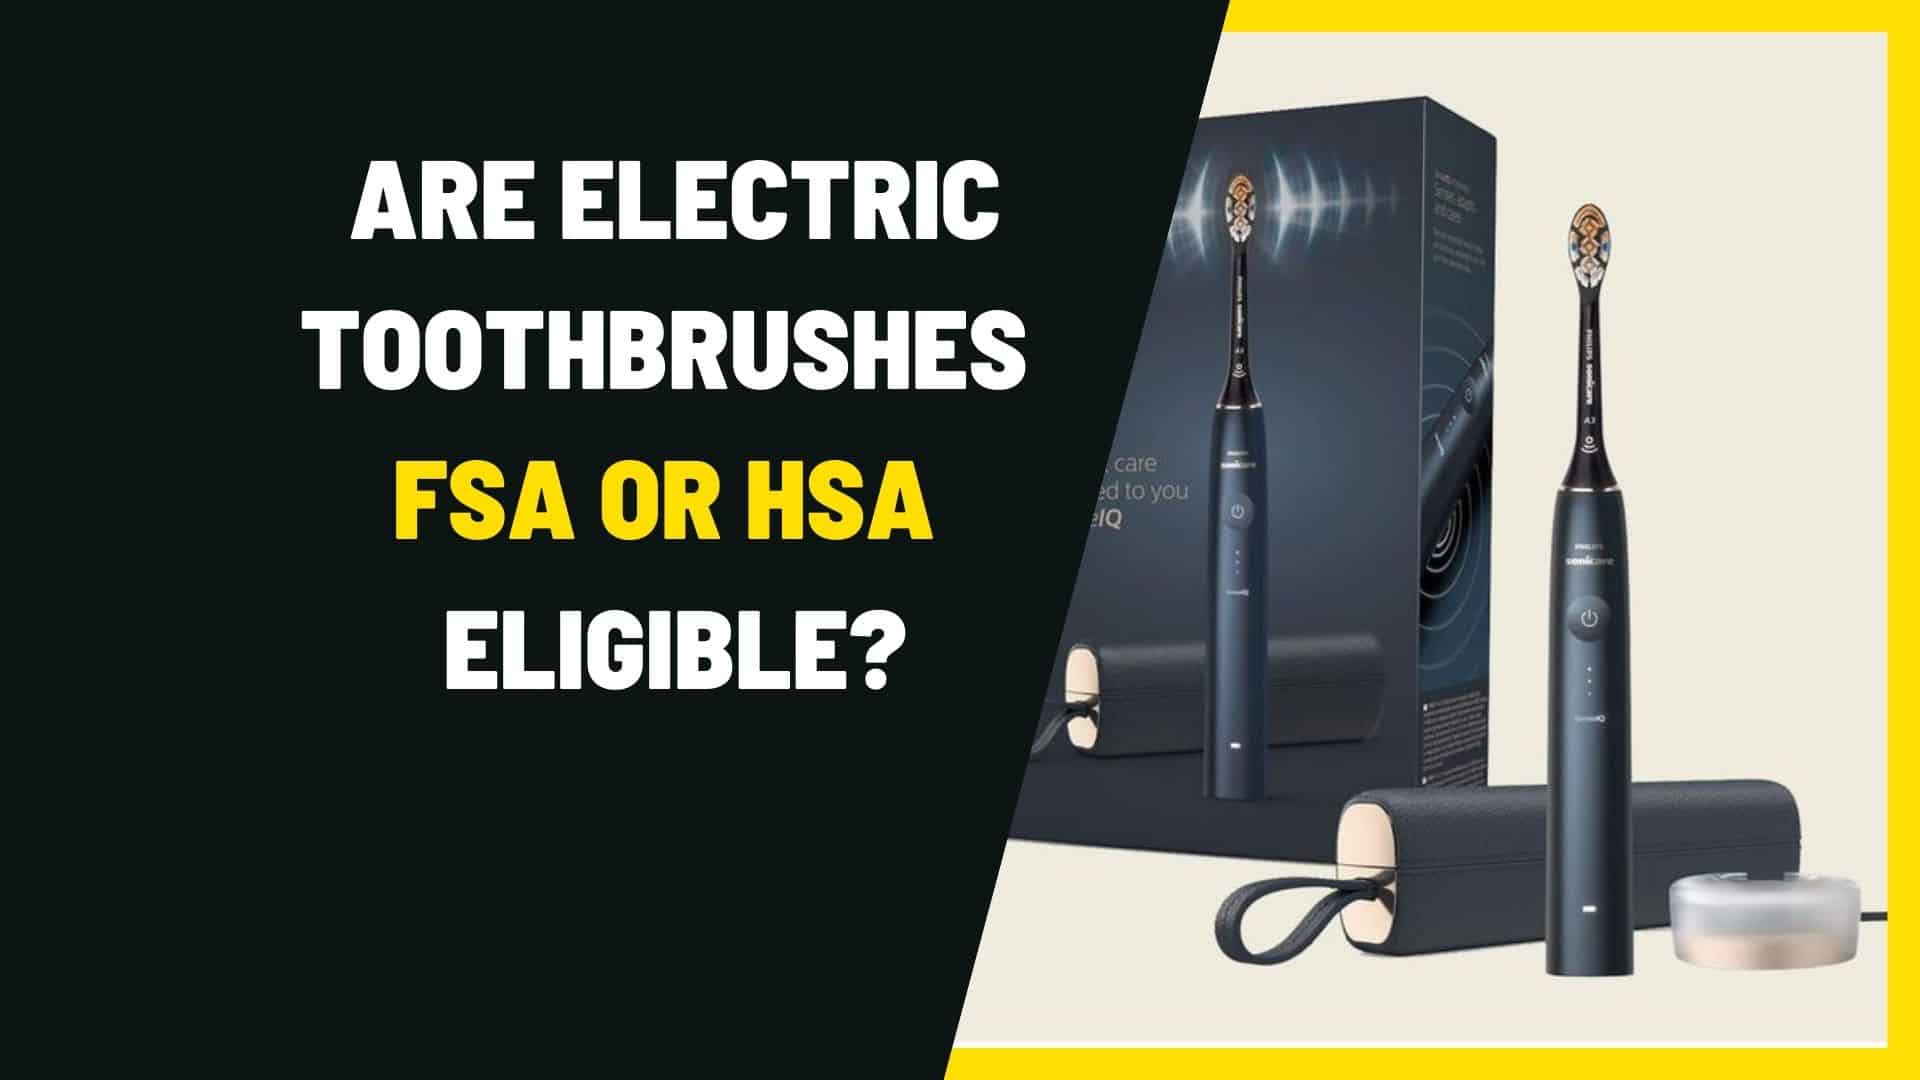 Are Electric Toothbrushes FSA or HSA Eligible